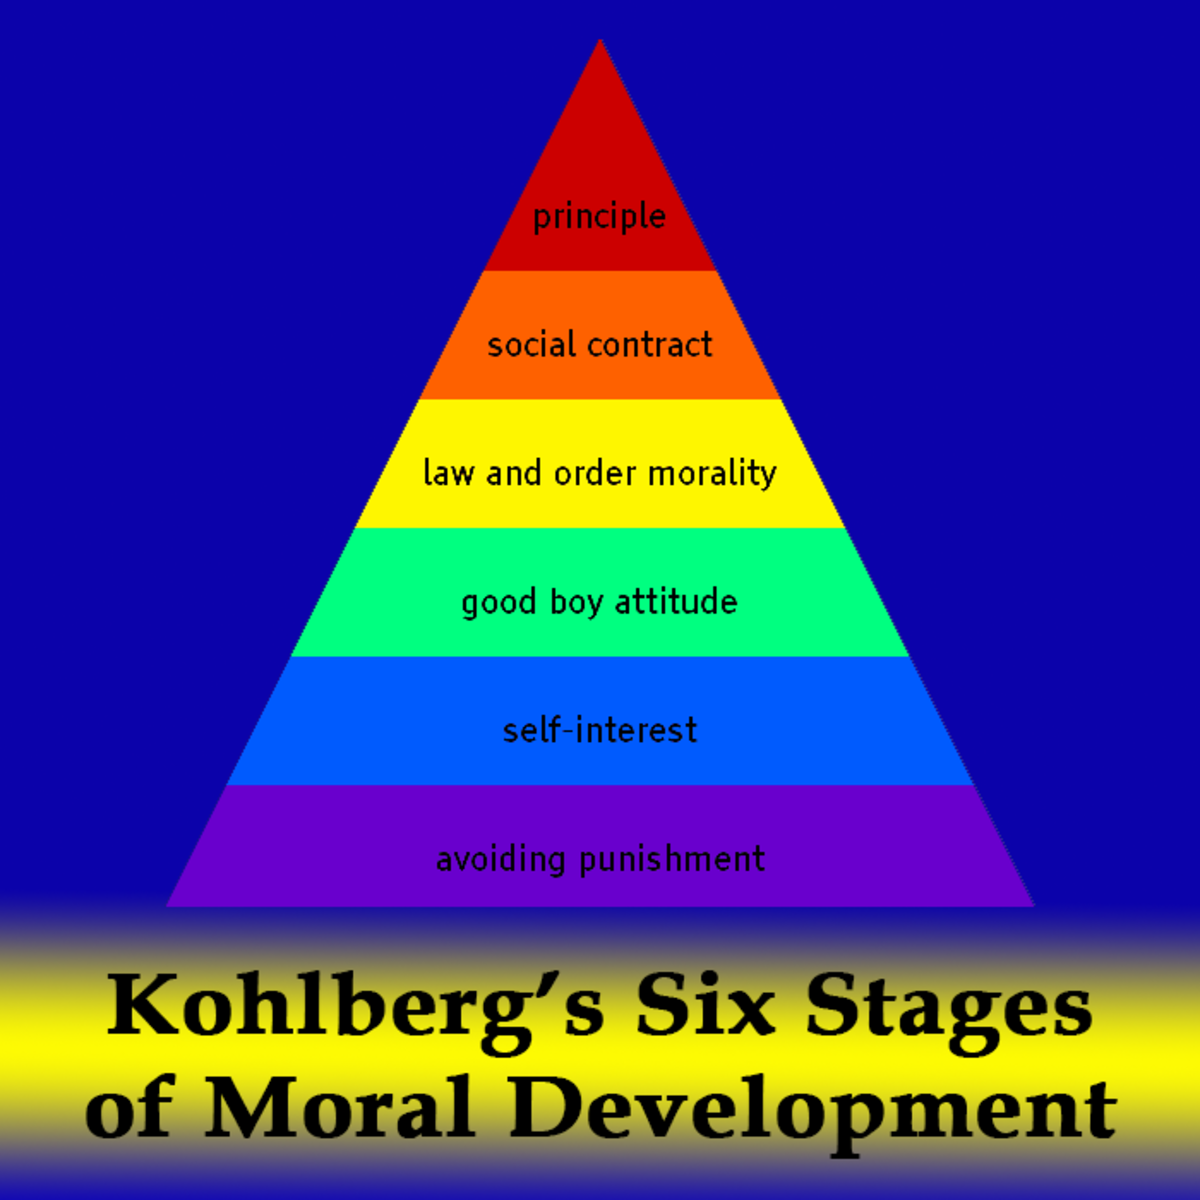 kohlberg's theory of moral development research paper